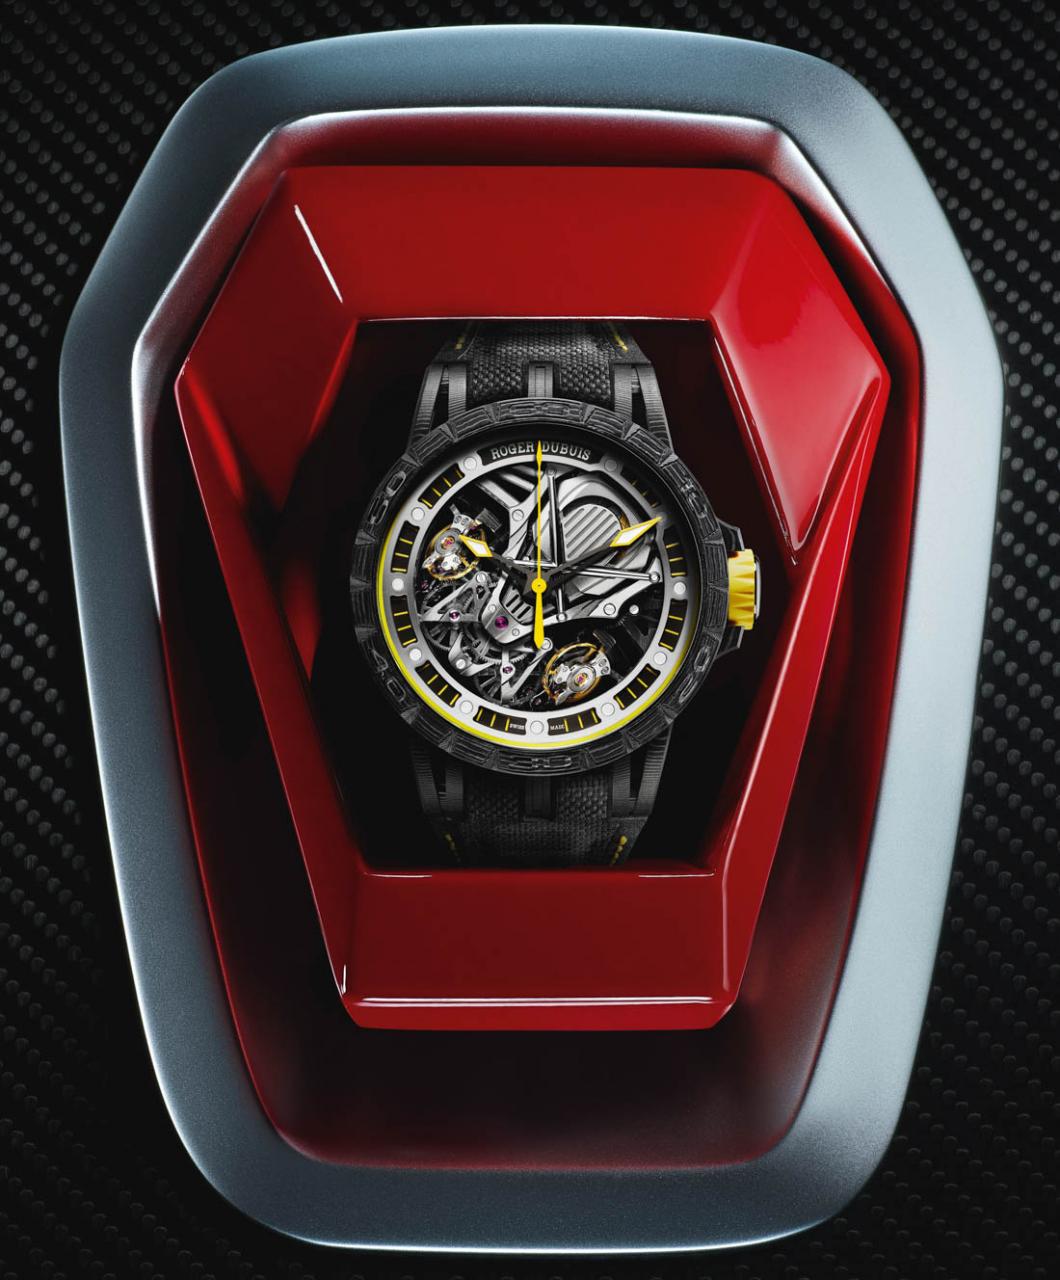 Roger Dubuis Becomes Official Partner Of Lamborghini, Launches 2 Watches With All-New Duotor Caliber